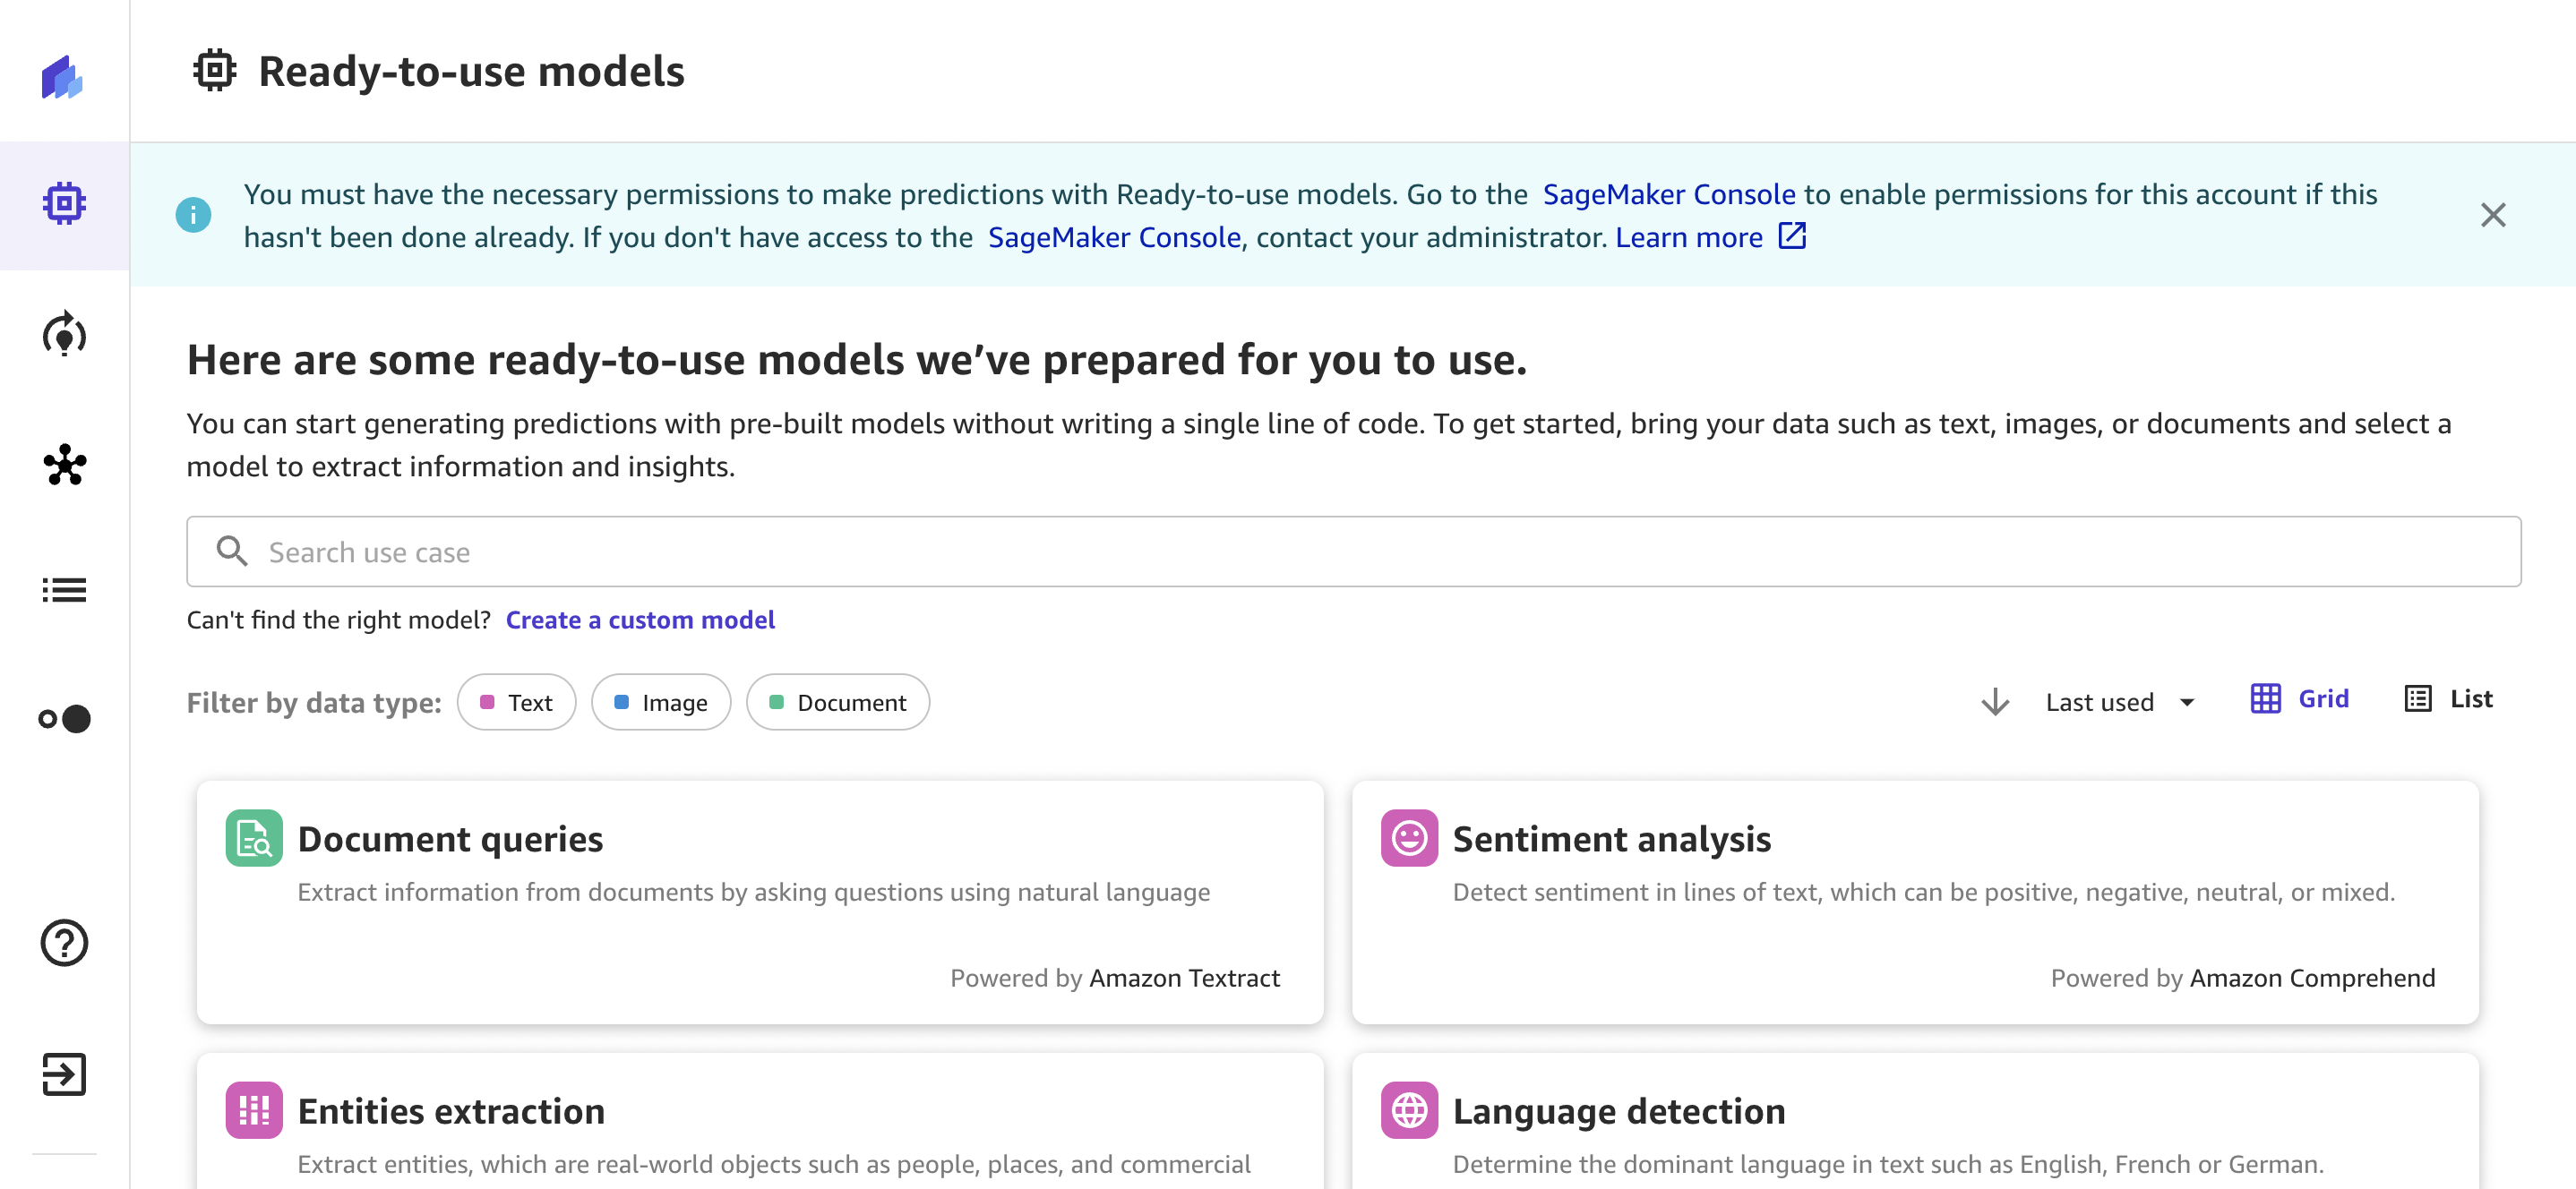 
    Screenshot of the Ready-to-use models landing page.
   